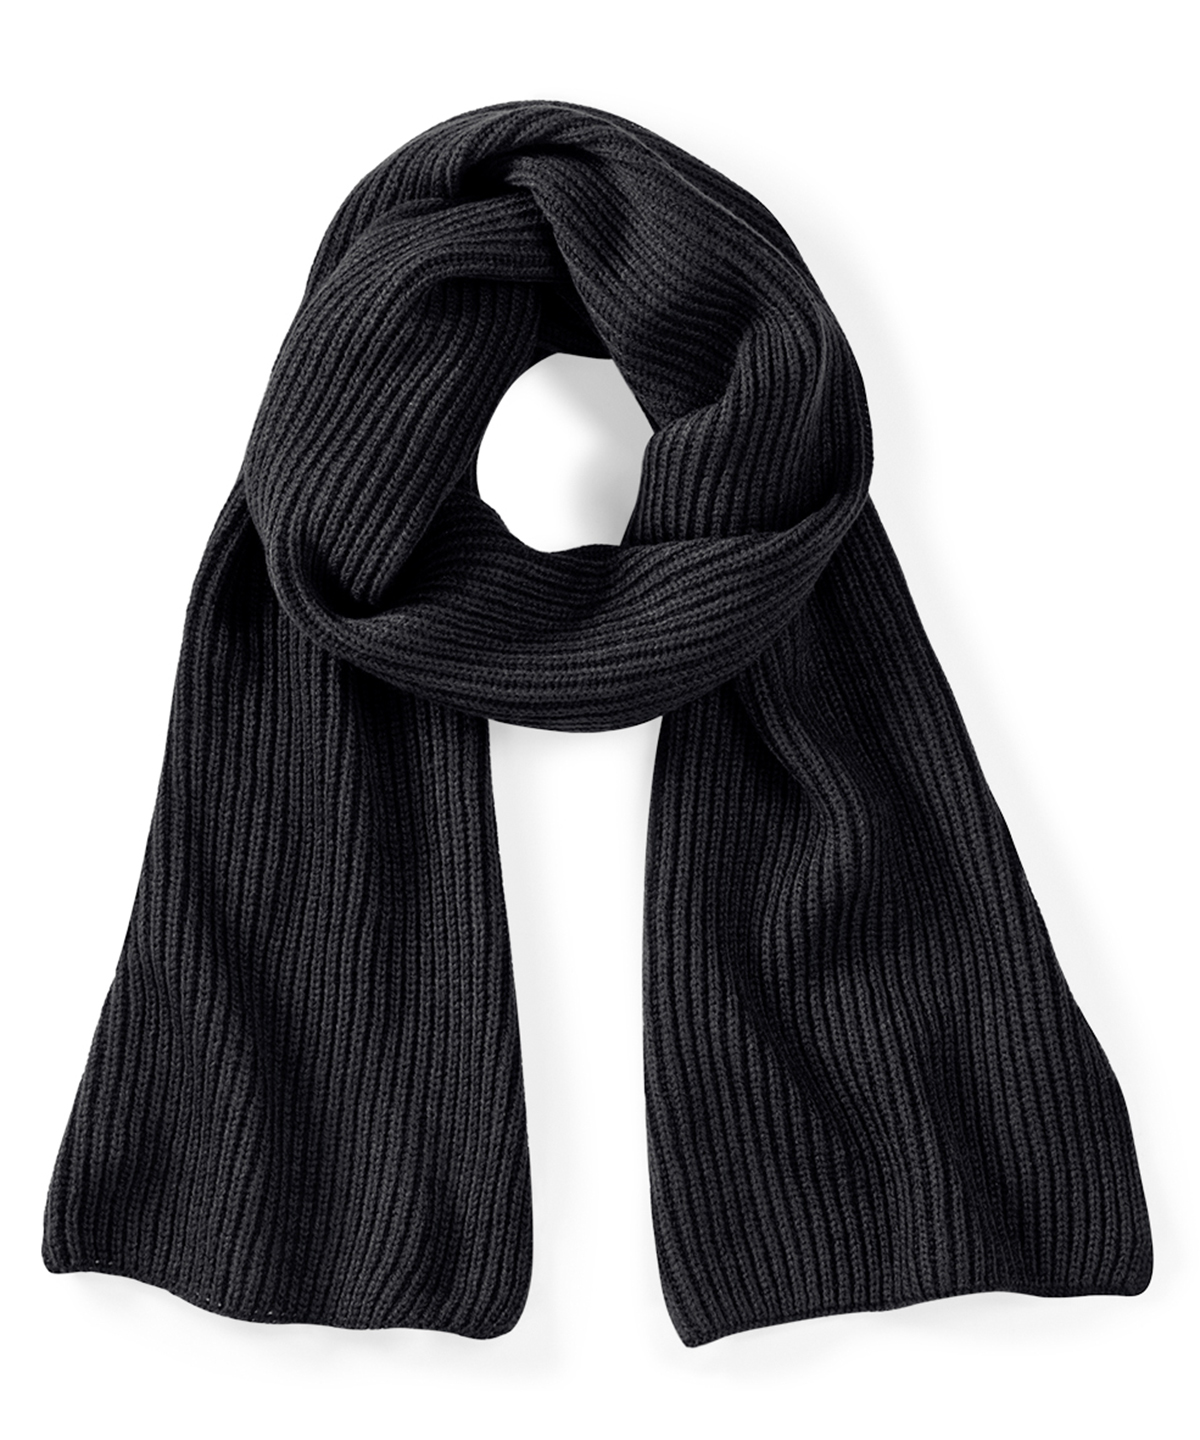 Metro Knitted Scarf Black Size One size